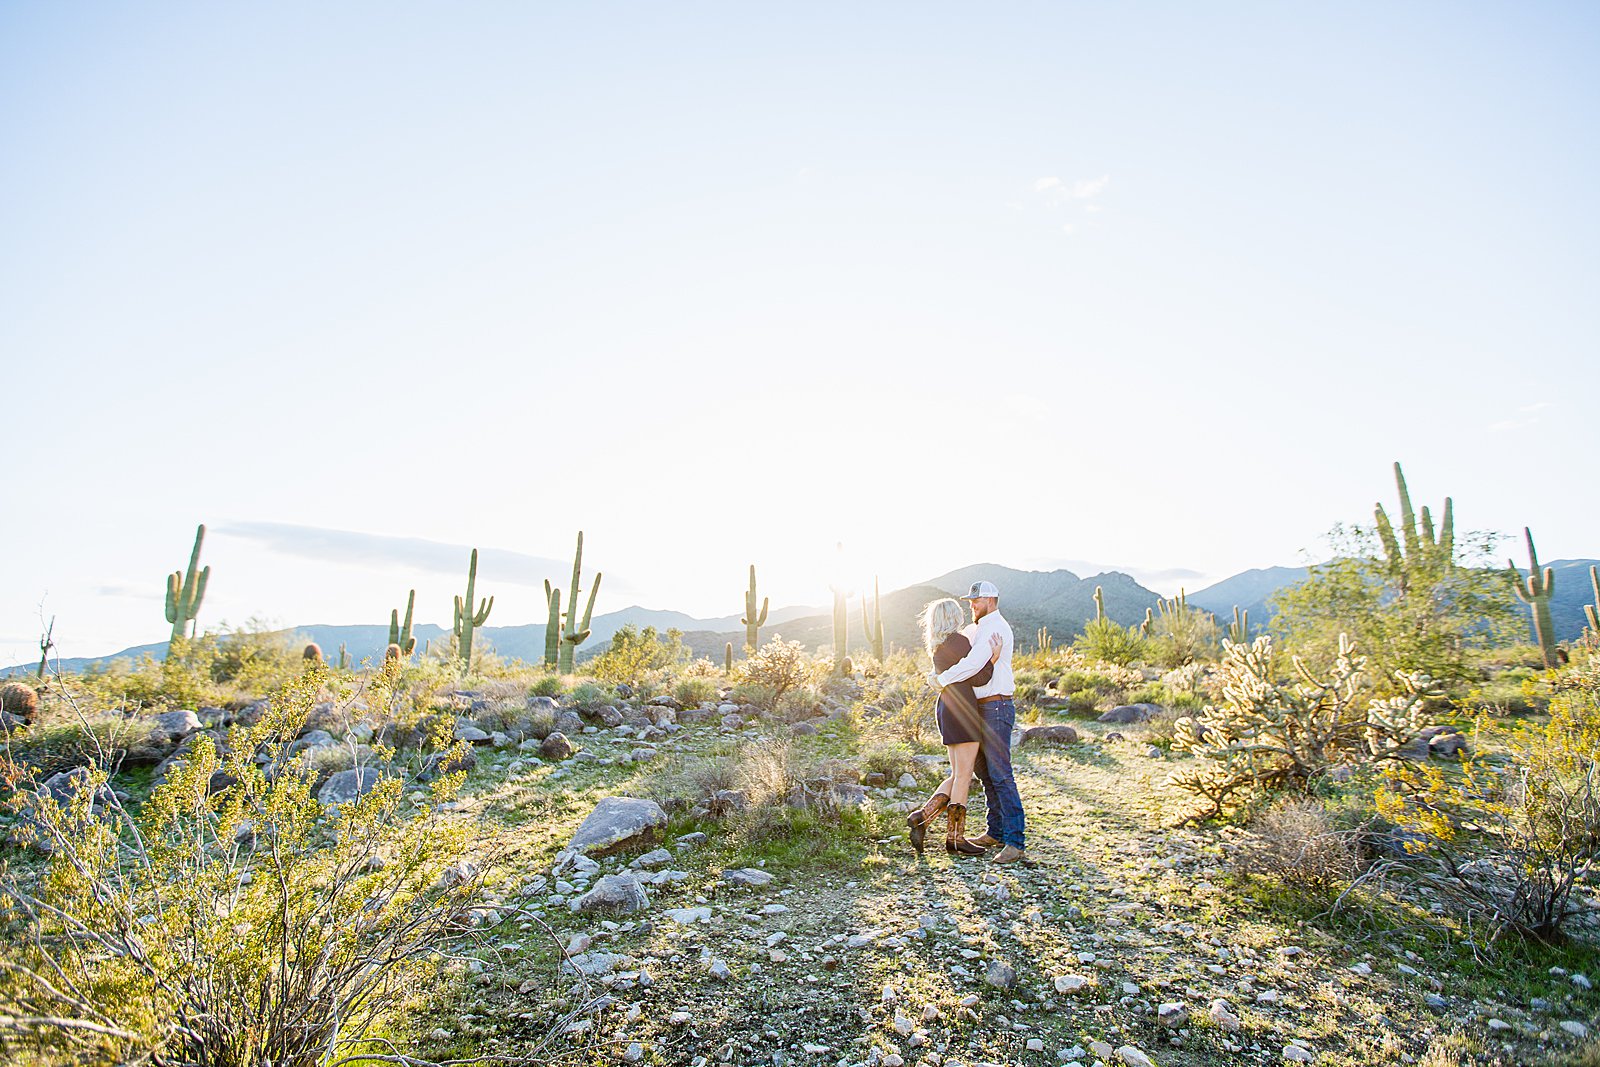 Couple pose for their White Tanks engagement session by Phoenix wedding photographer PMA Photography.